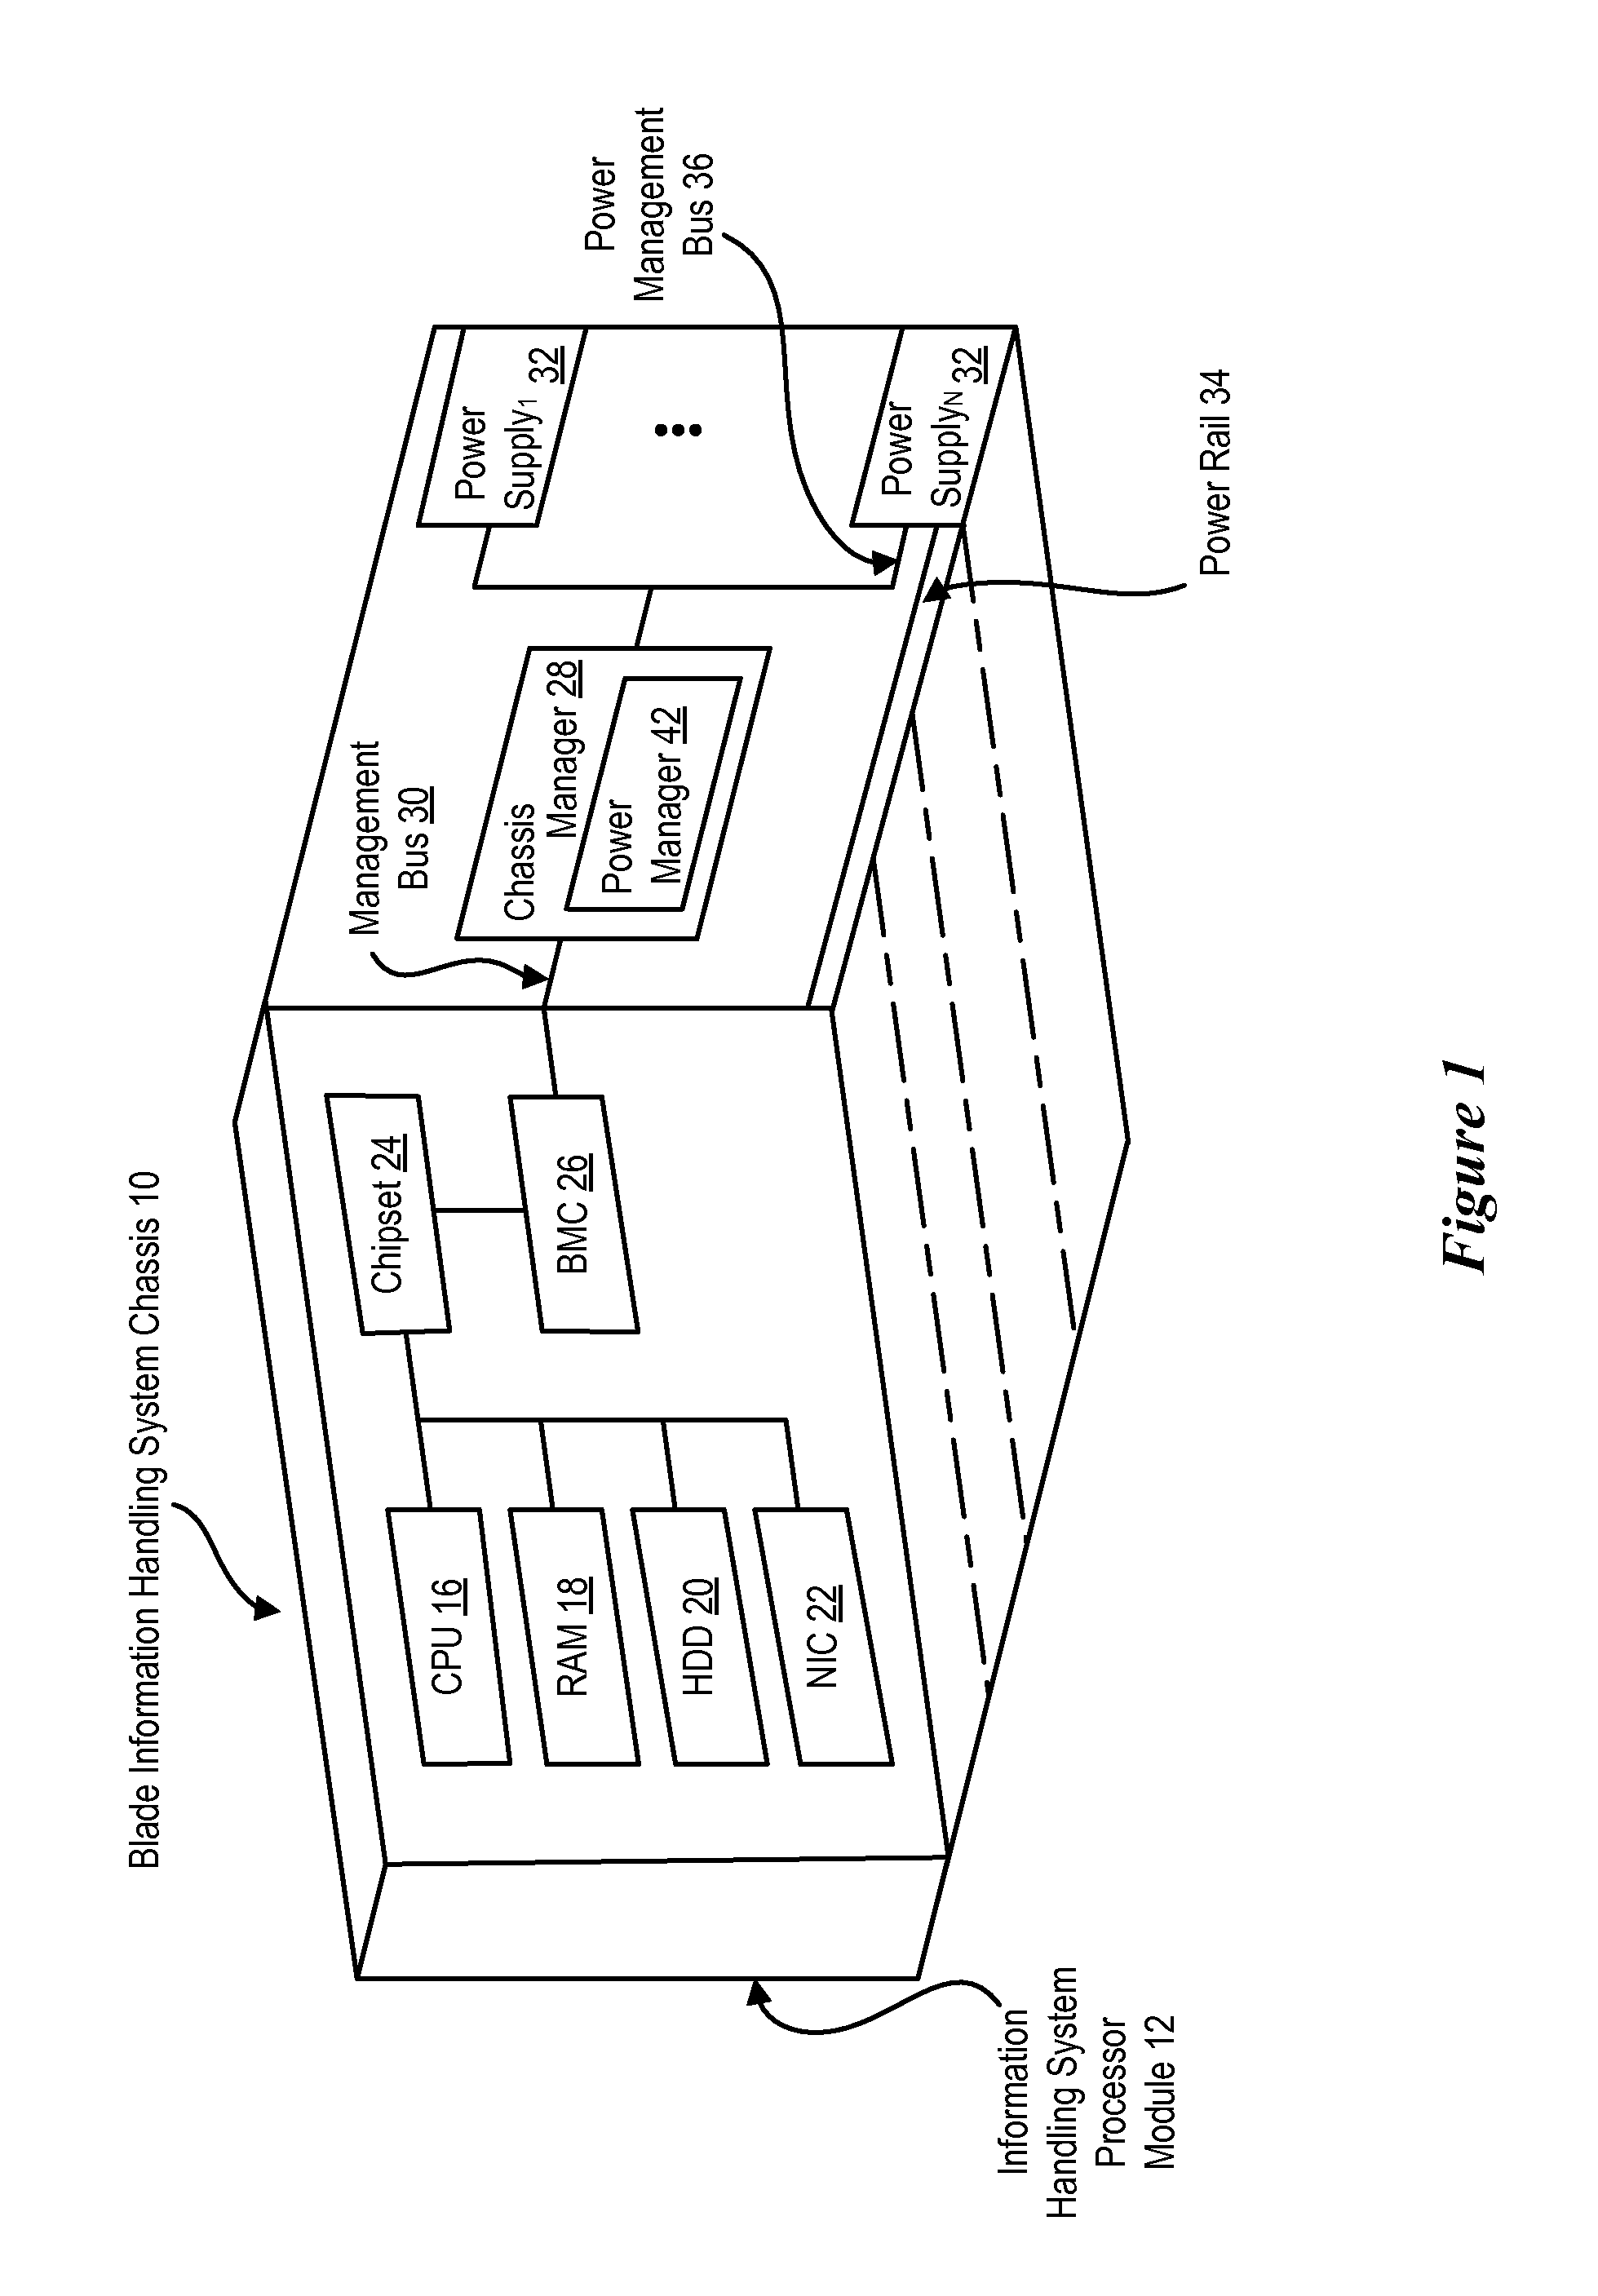 System and method for managing information handling system power supply capacity utilization based on load sharing power loss